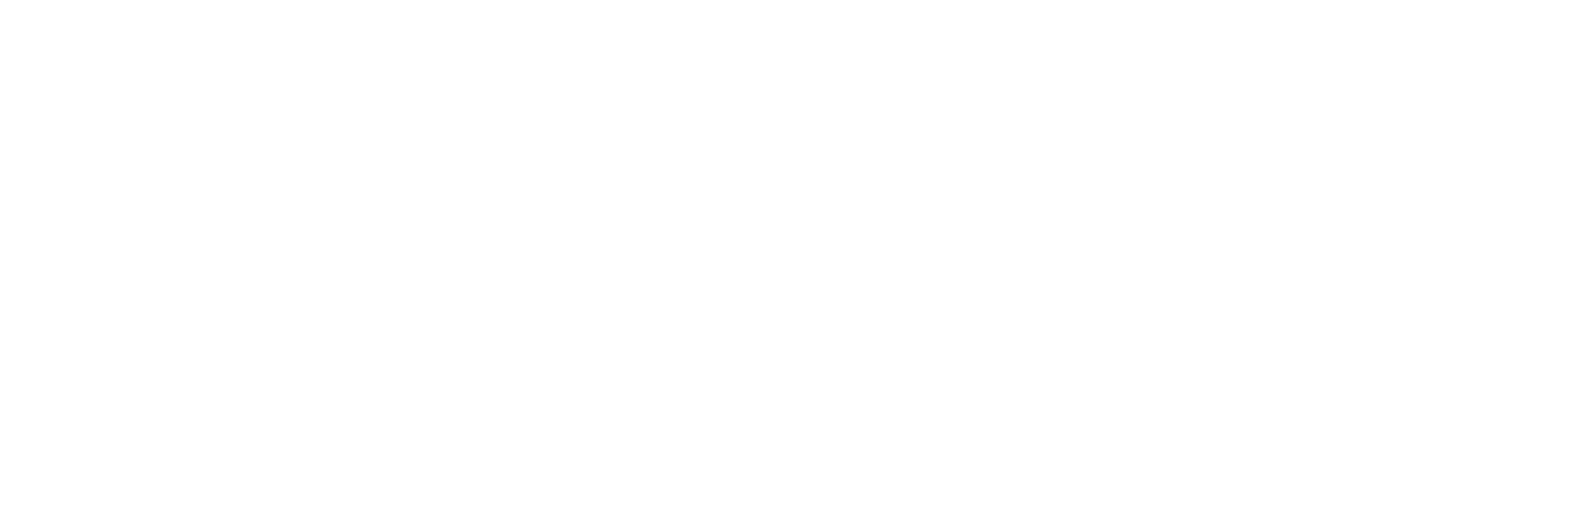 Pick n Pay Stores logo for dark backgrounds (transparent PNG)